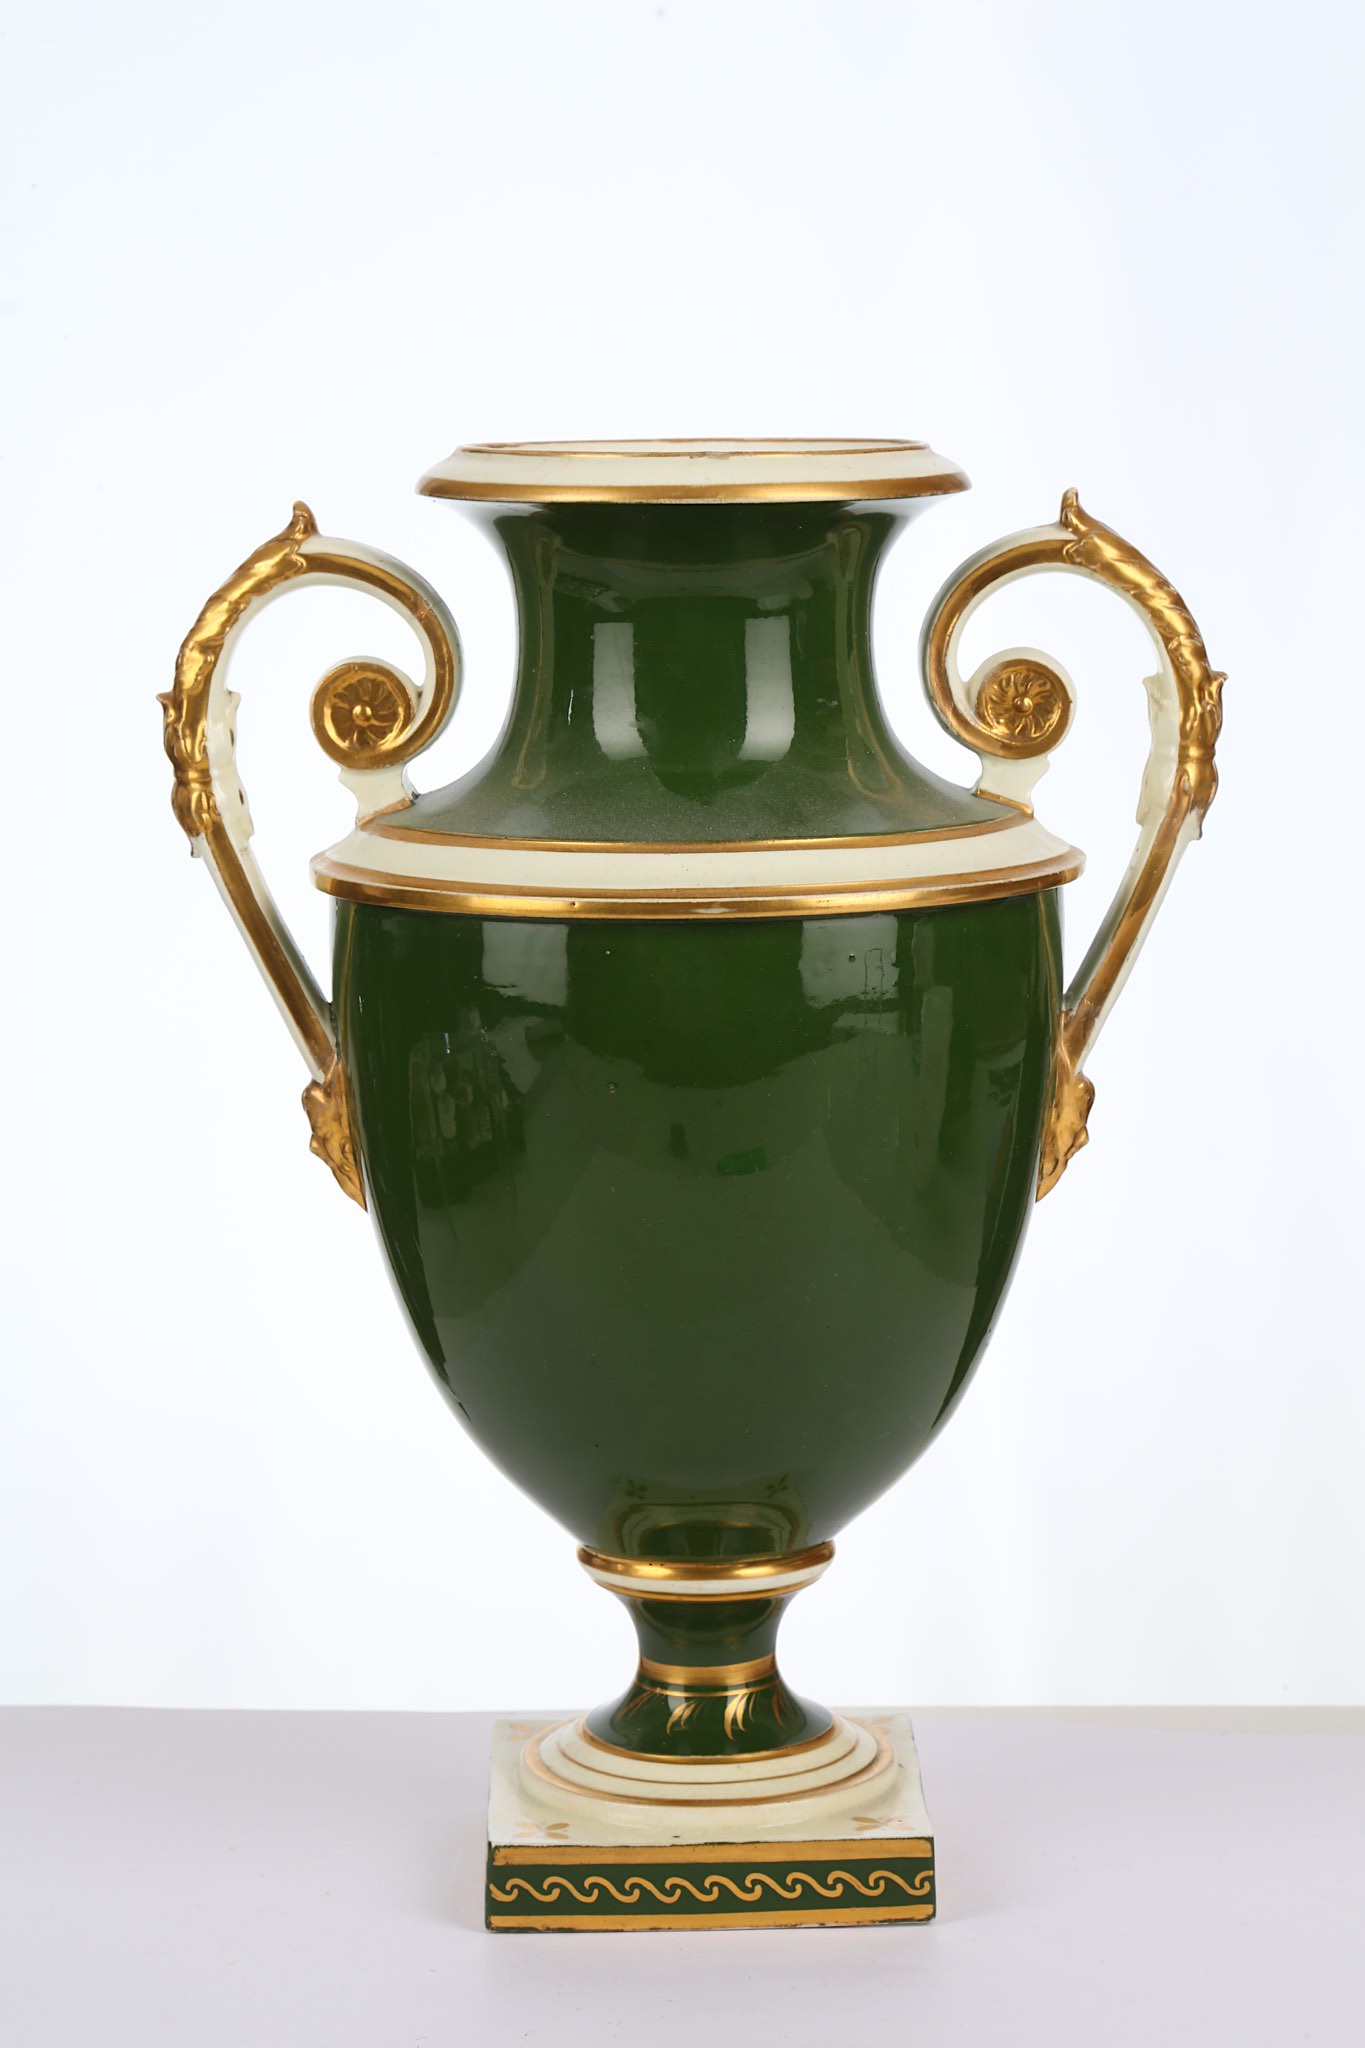 A BLOOR DERBY PORCELAIN 'NAMED VIEW' TOPOGRAPHICAL VASE, circa 1820-40, of urn-shaped form with twin - Image 3 of 4